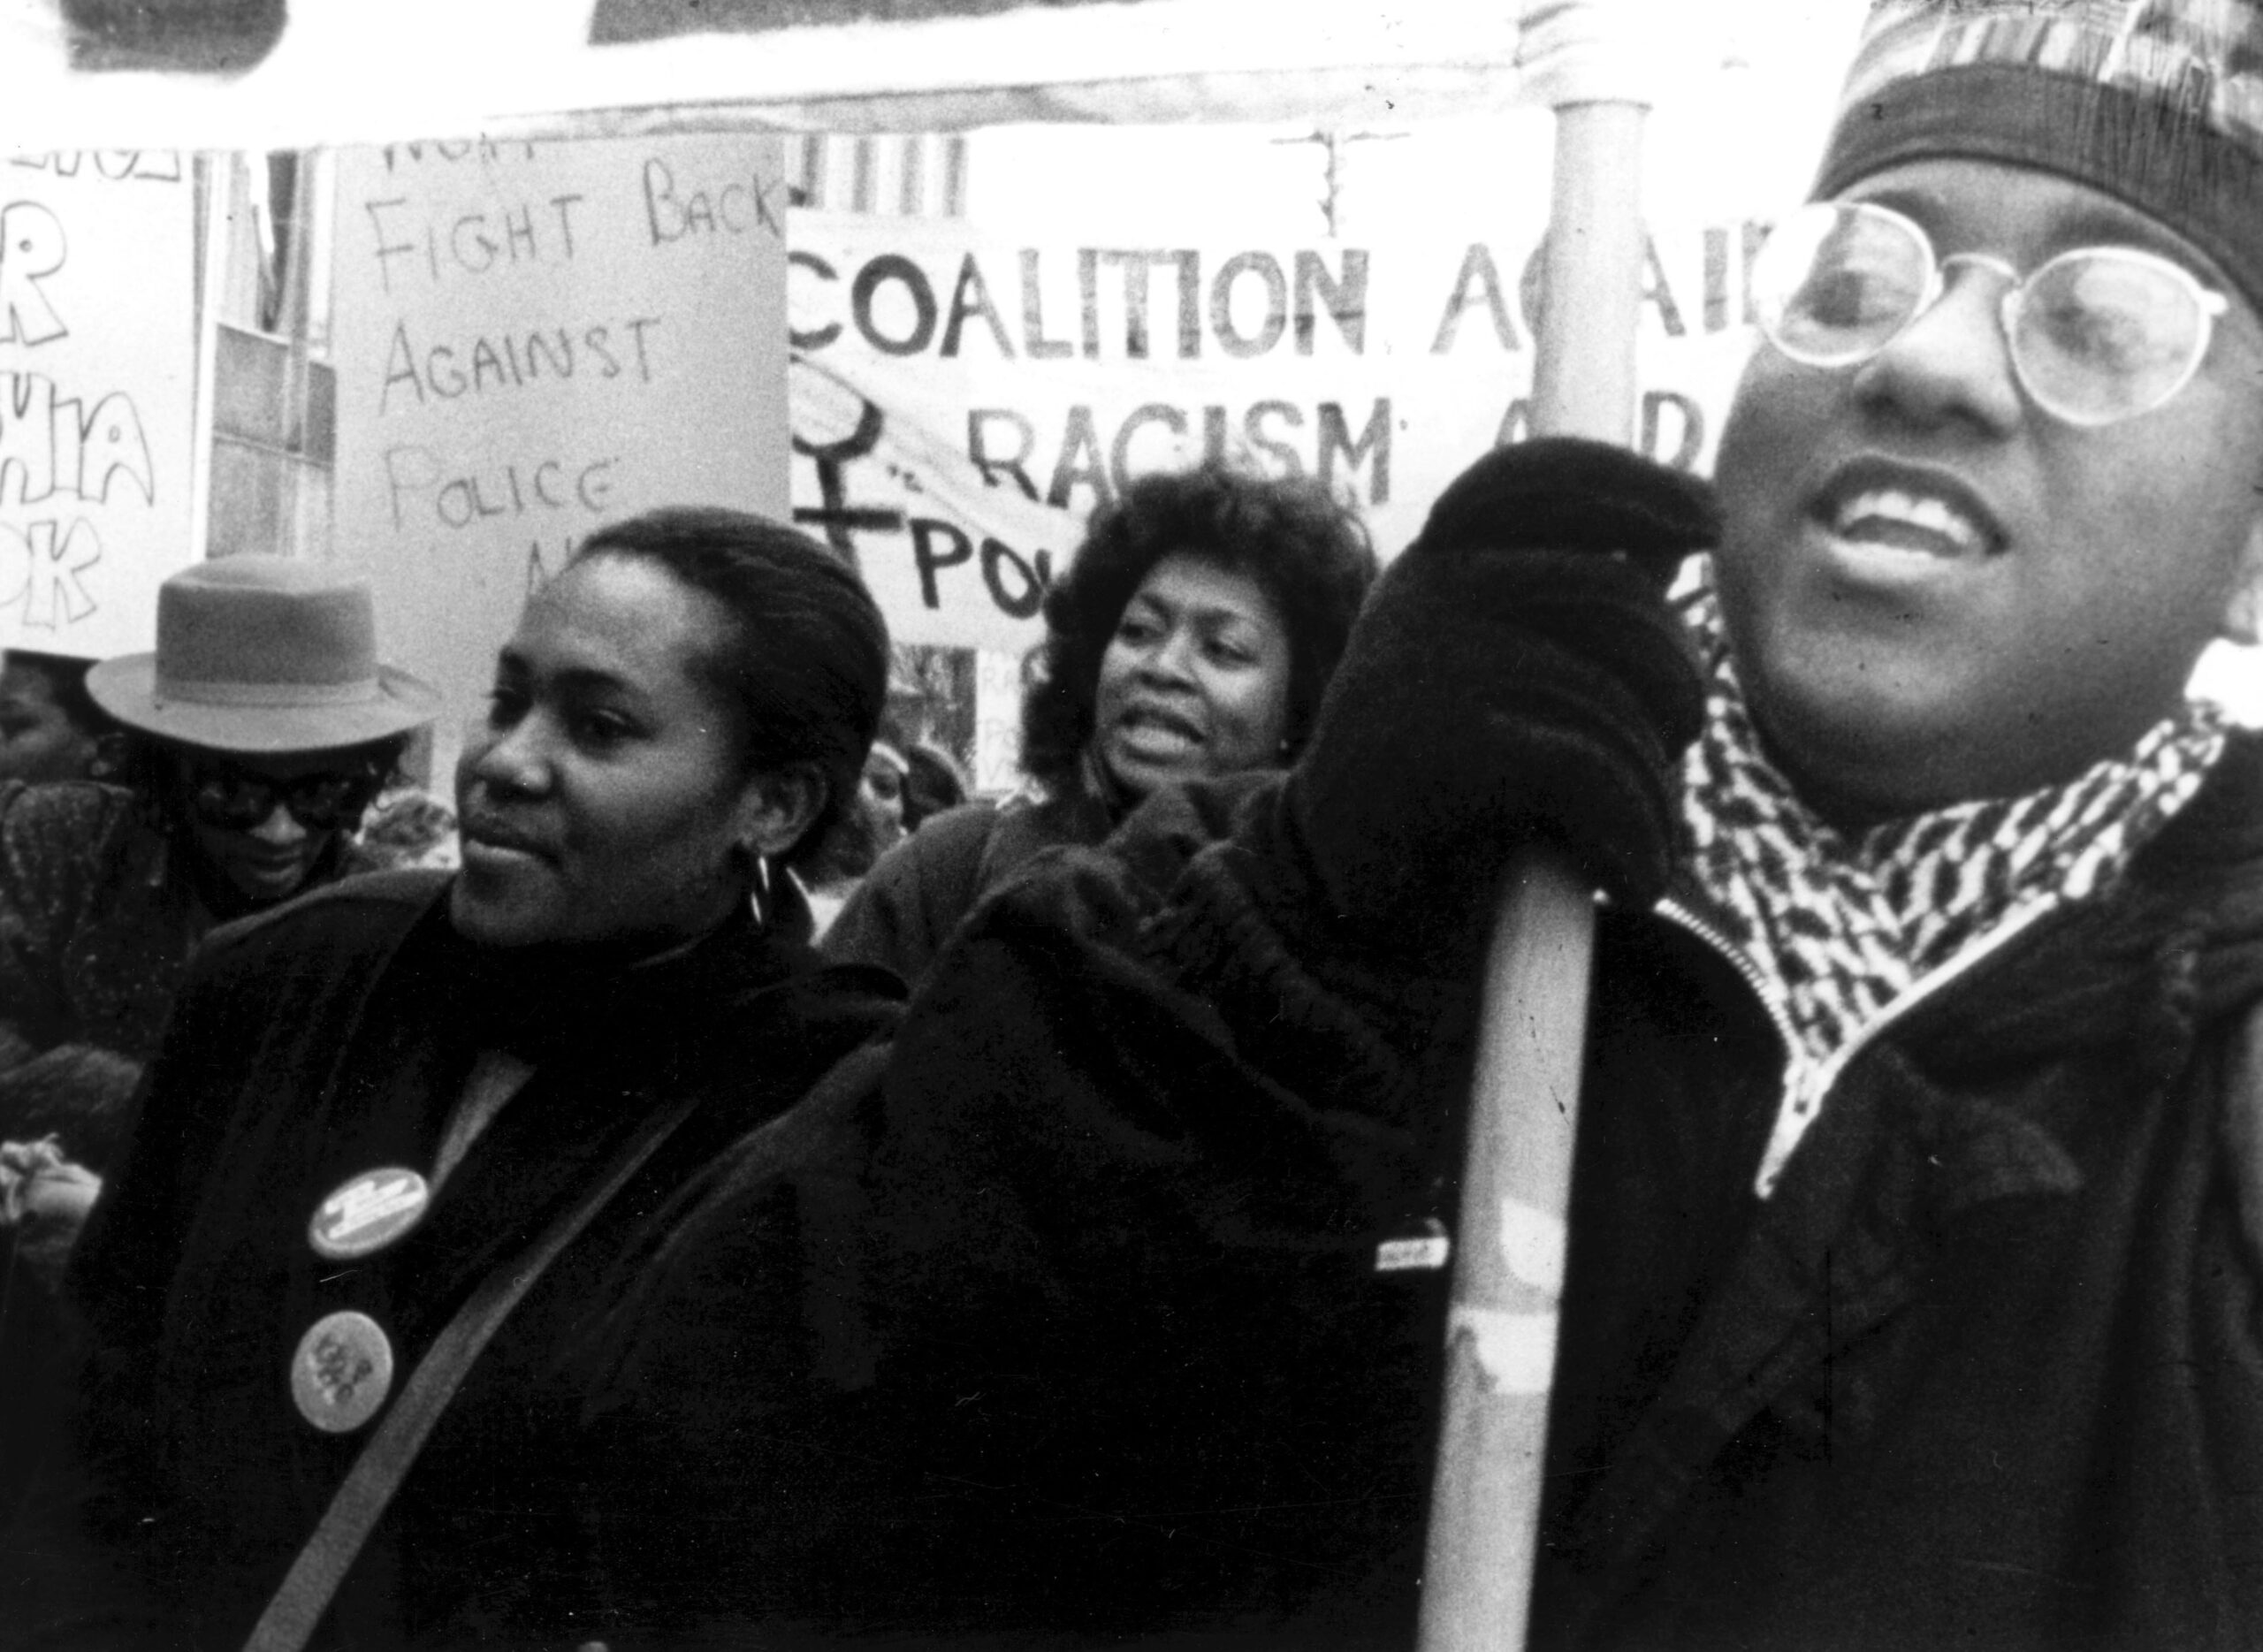 A black and white image of a group of women protesting with signs that say "fight back against police" and a cutoff sign that has the words "coalition and racism"